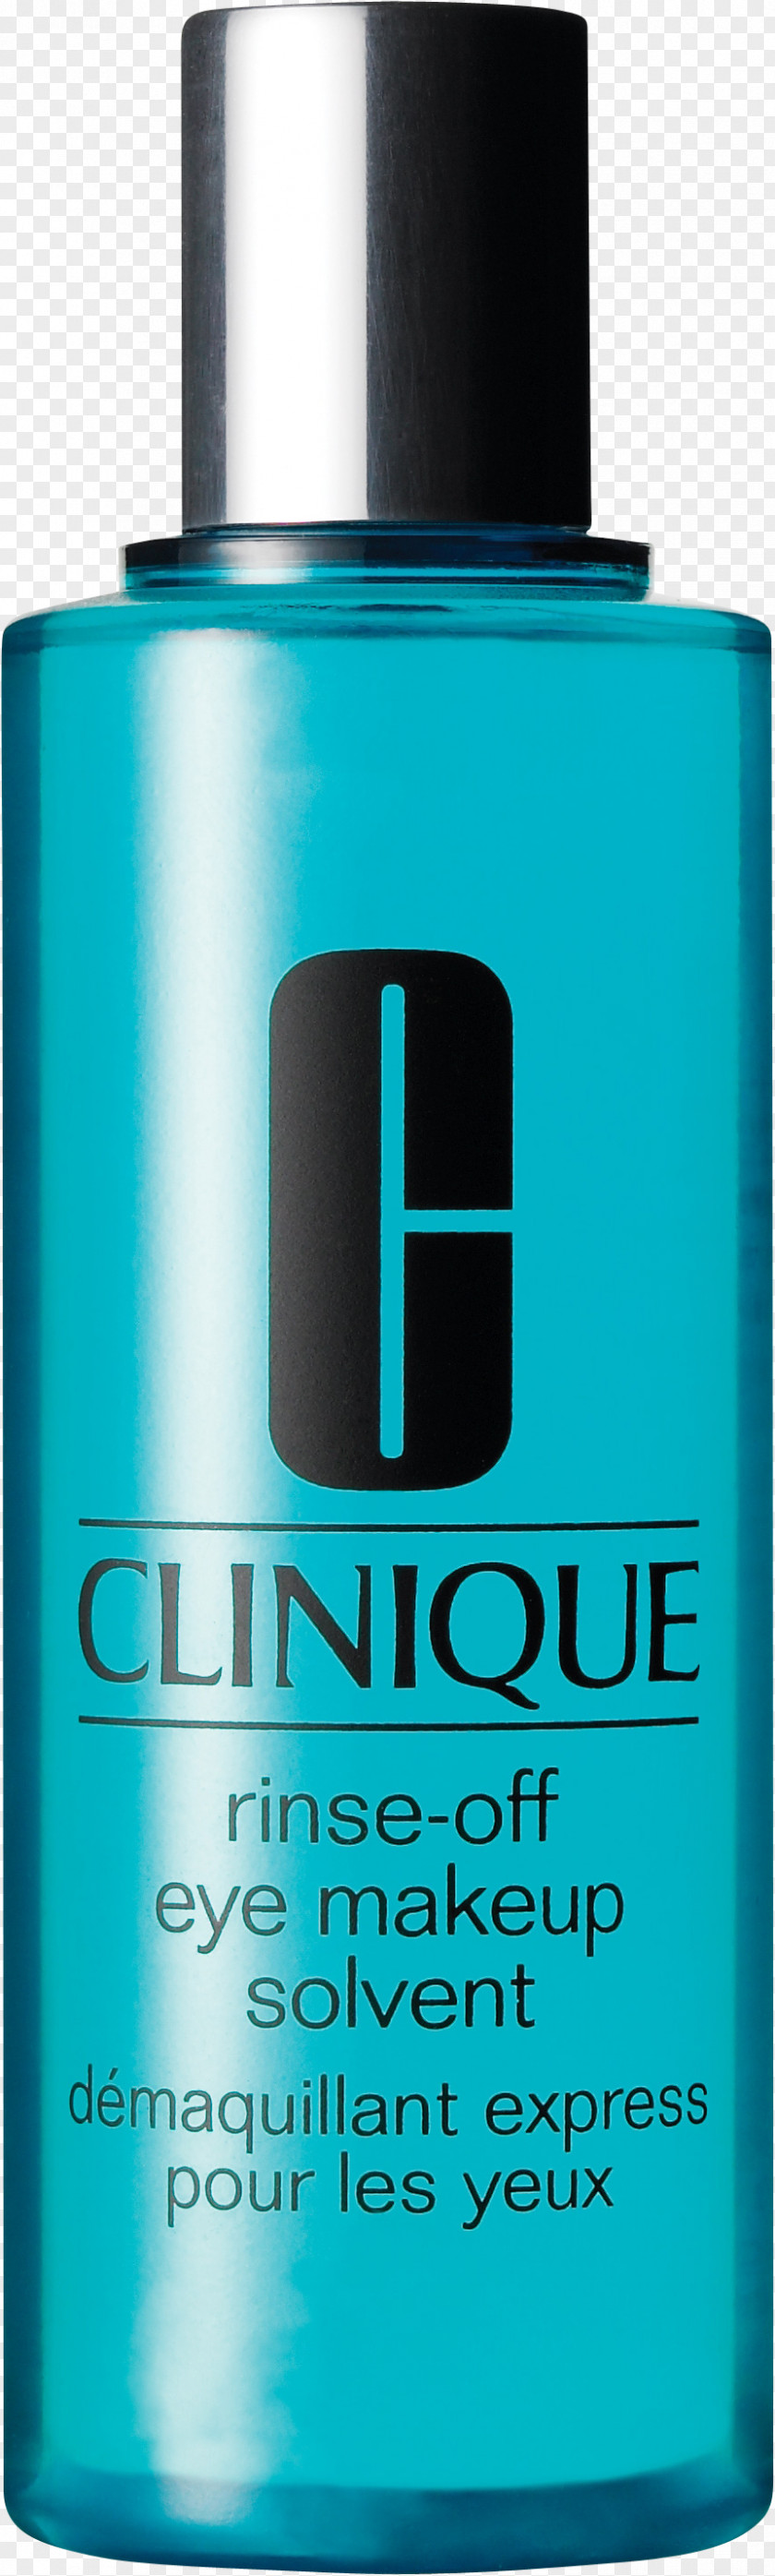 Clinique Lash Power Mascara Cosmetics Lotion Hair Conditioner PNG